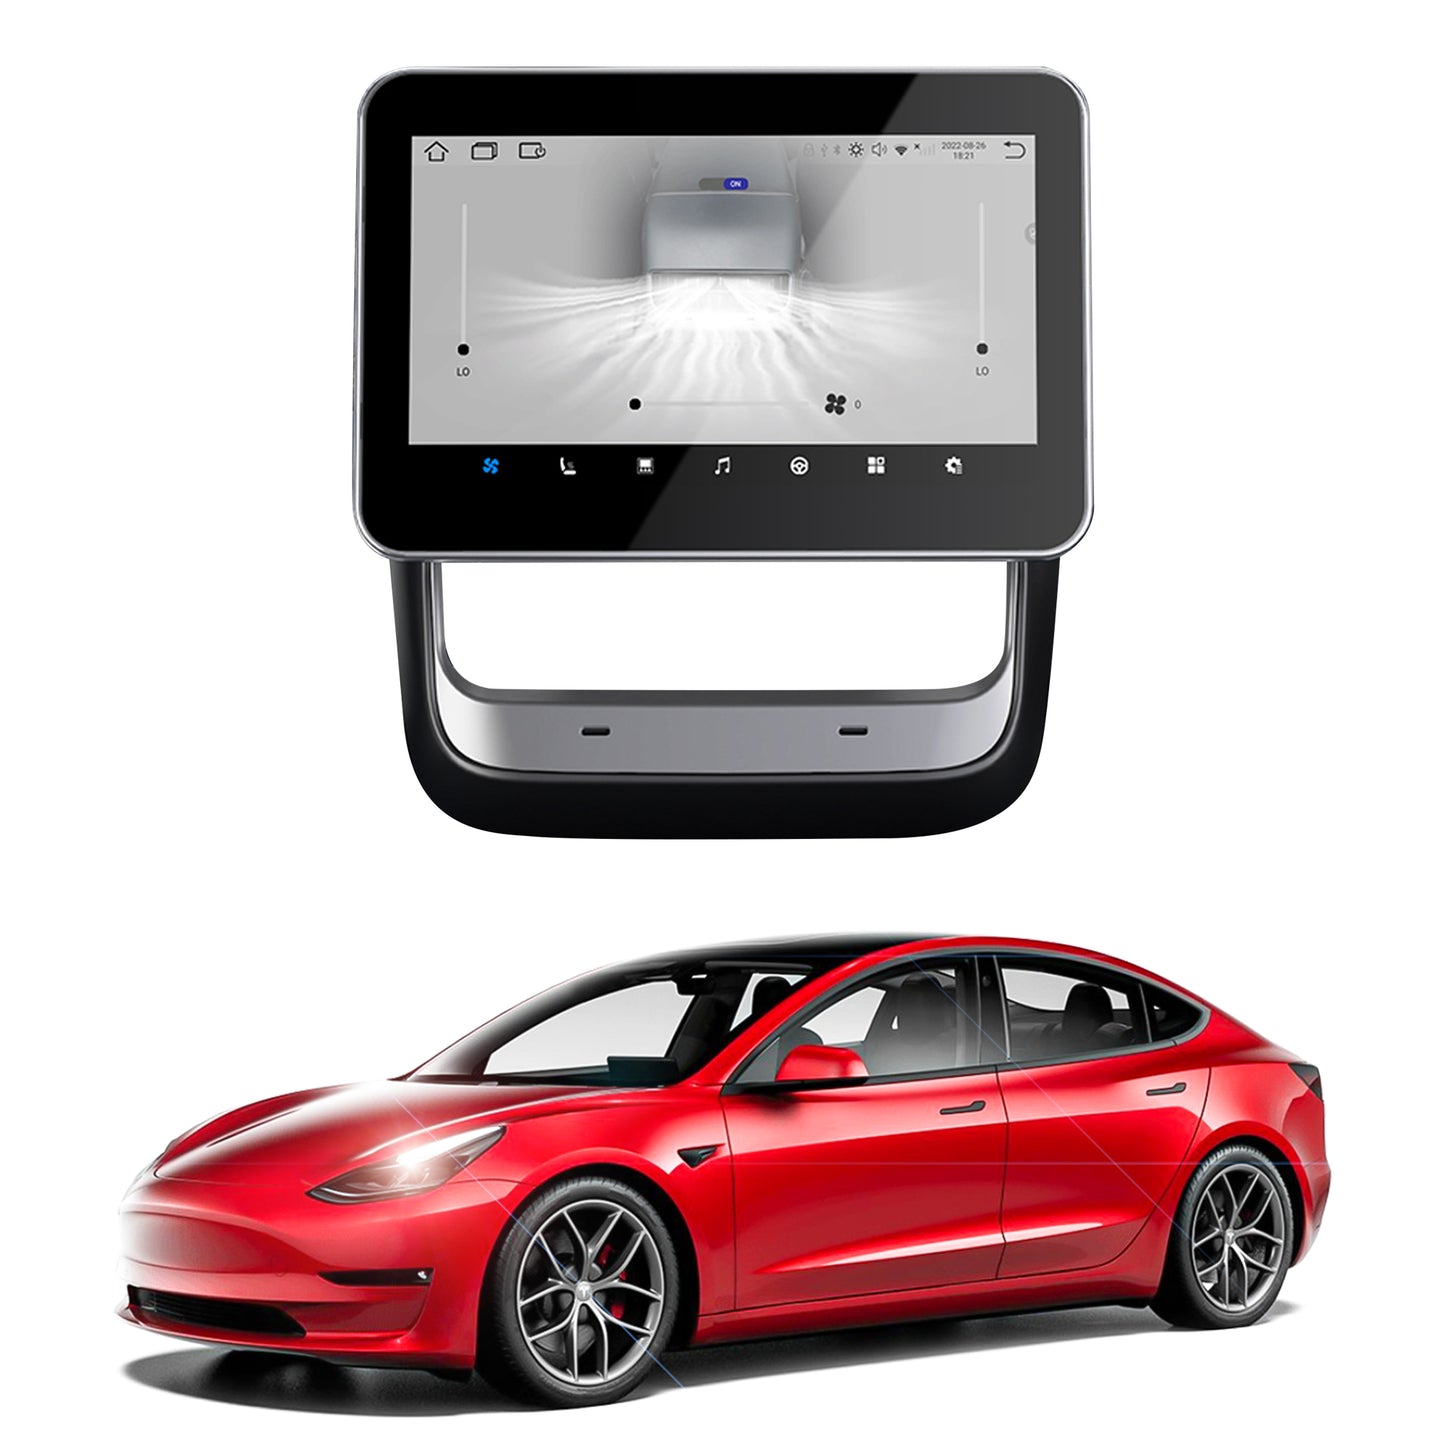 tesla Model 3/Y/X/S 2022 2023 2021 2020 2019 8-inch 1280x720 high-definition display Rear Seat Entertainment Screen 8-inch 1280x720 high-definition display Support wireless Carplay and android AUTO, also wireless Internet access, online music, online games, and Internet TV